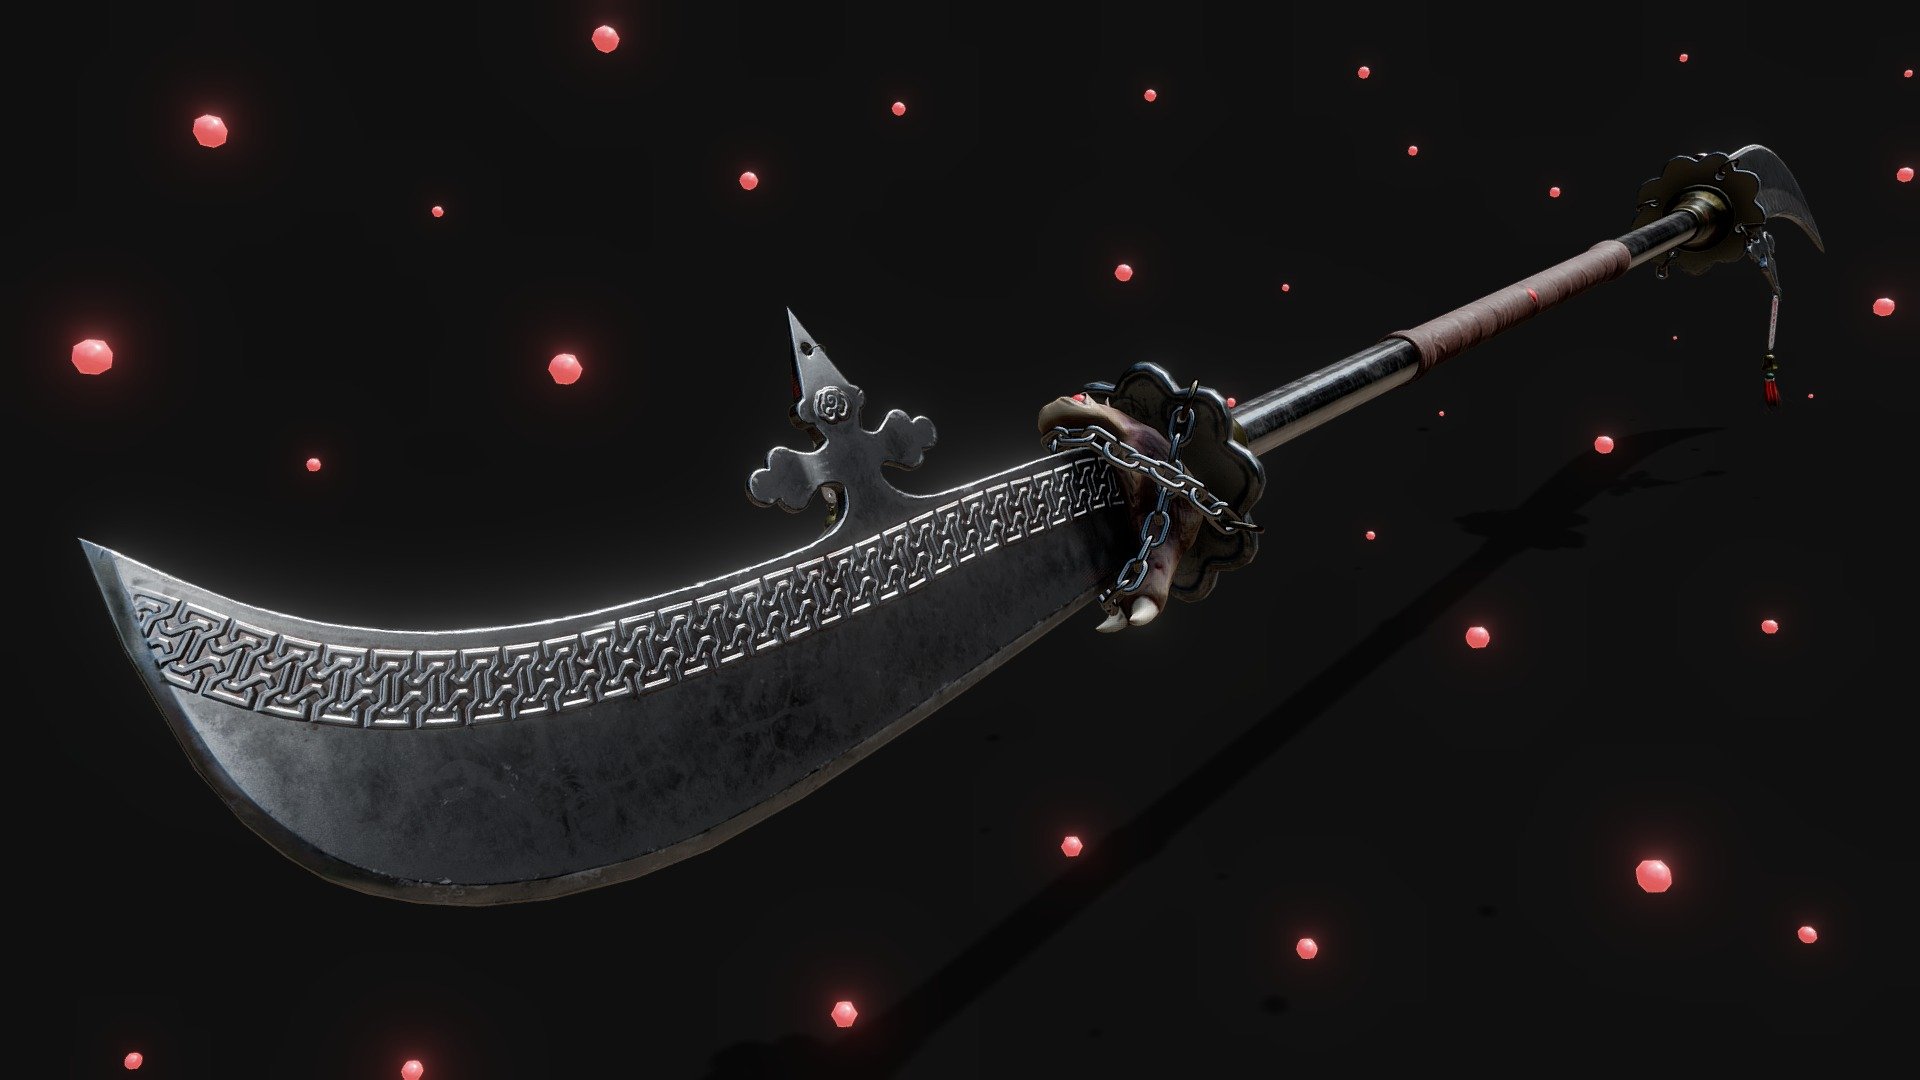 ⚔️ It is my great pleasure to present another model of a sword, the GUAN DAO sword, ready to use on all you need. ENJOY!!! ⚔️

4k Textures | PBR Texturing
.fbx with mapping
.png textures

READY to use on Unity and Unreal Engine ❤️ Awesome for PBR games, indie games, or any other game.

🎉Have fun friends !!!

Maya | ZBrush | Substance Painter | RizumUV | TopoGun 3 | Marmoset ToolBag | PureRef | Unreal Engine 5 - Guandao Sword - Buy Royalty Free 3D model by Tiago Lopes (@drobluda) 3d model